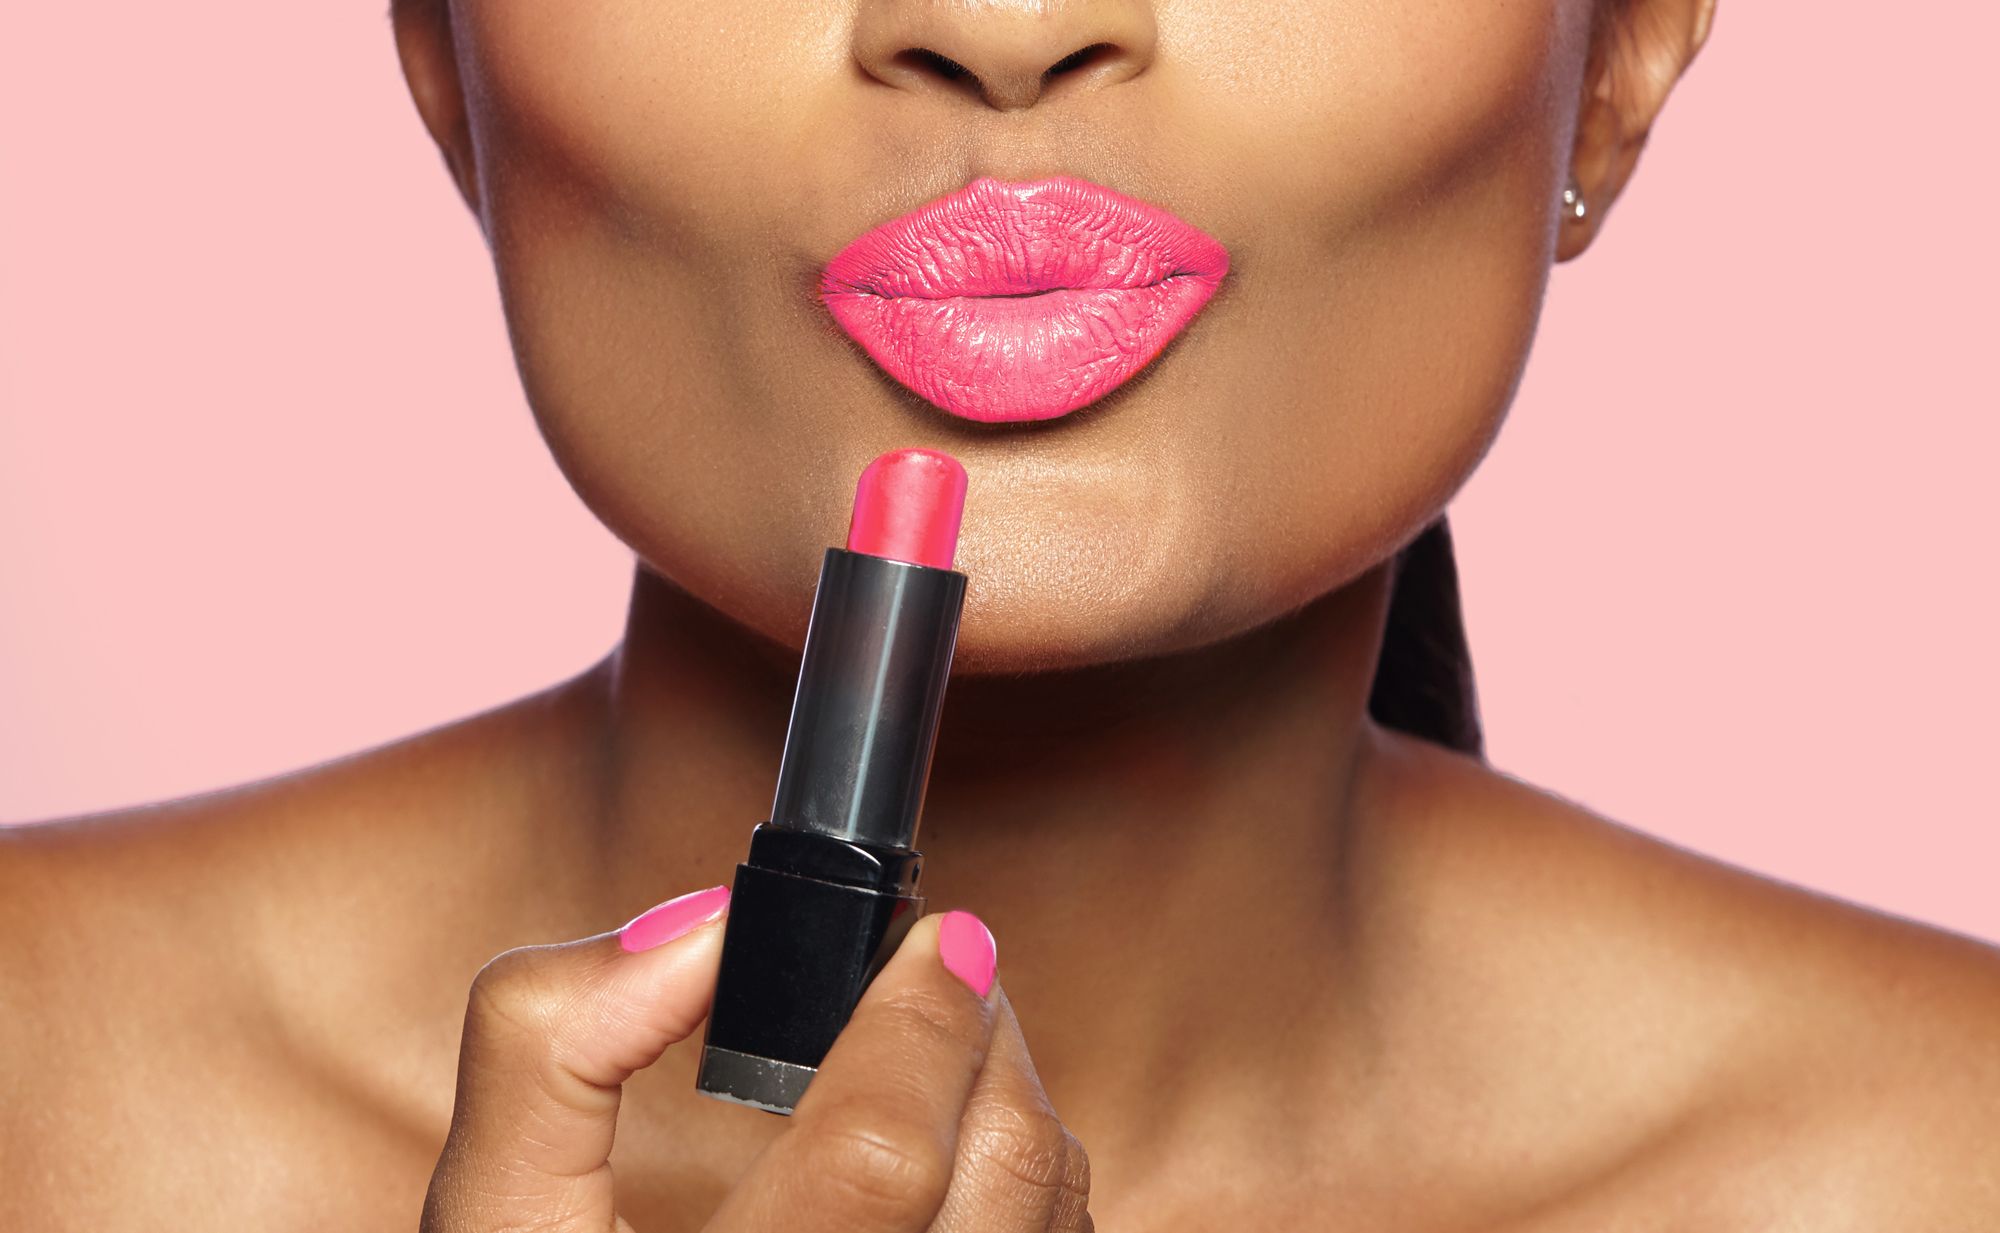 How to properly apply lip gloss for a flawless and natural look?